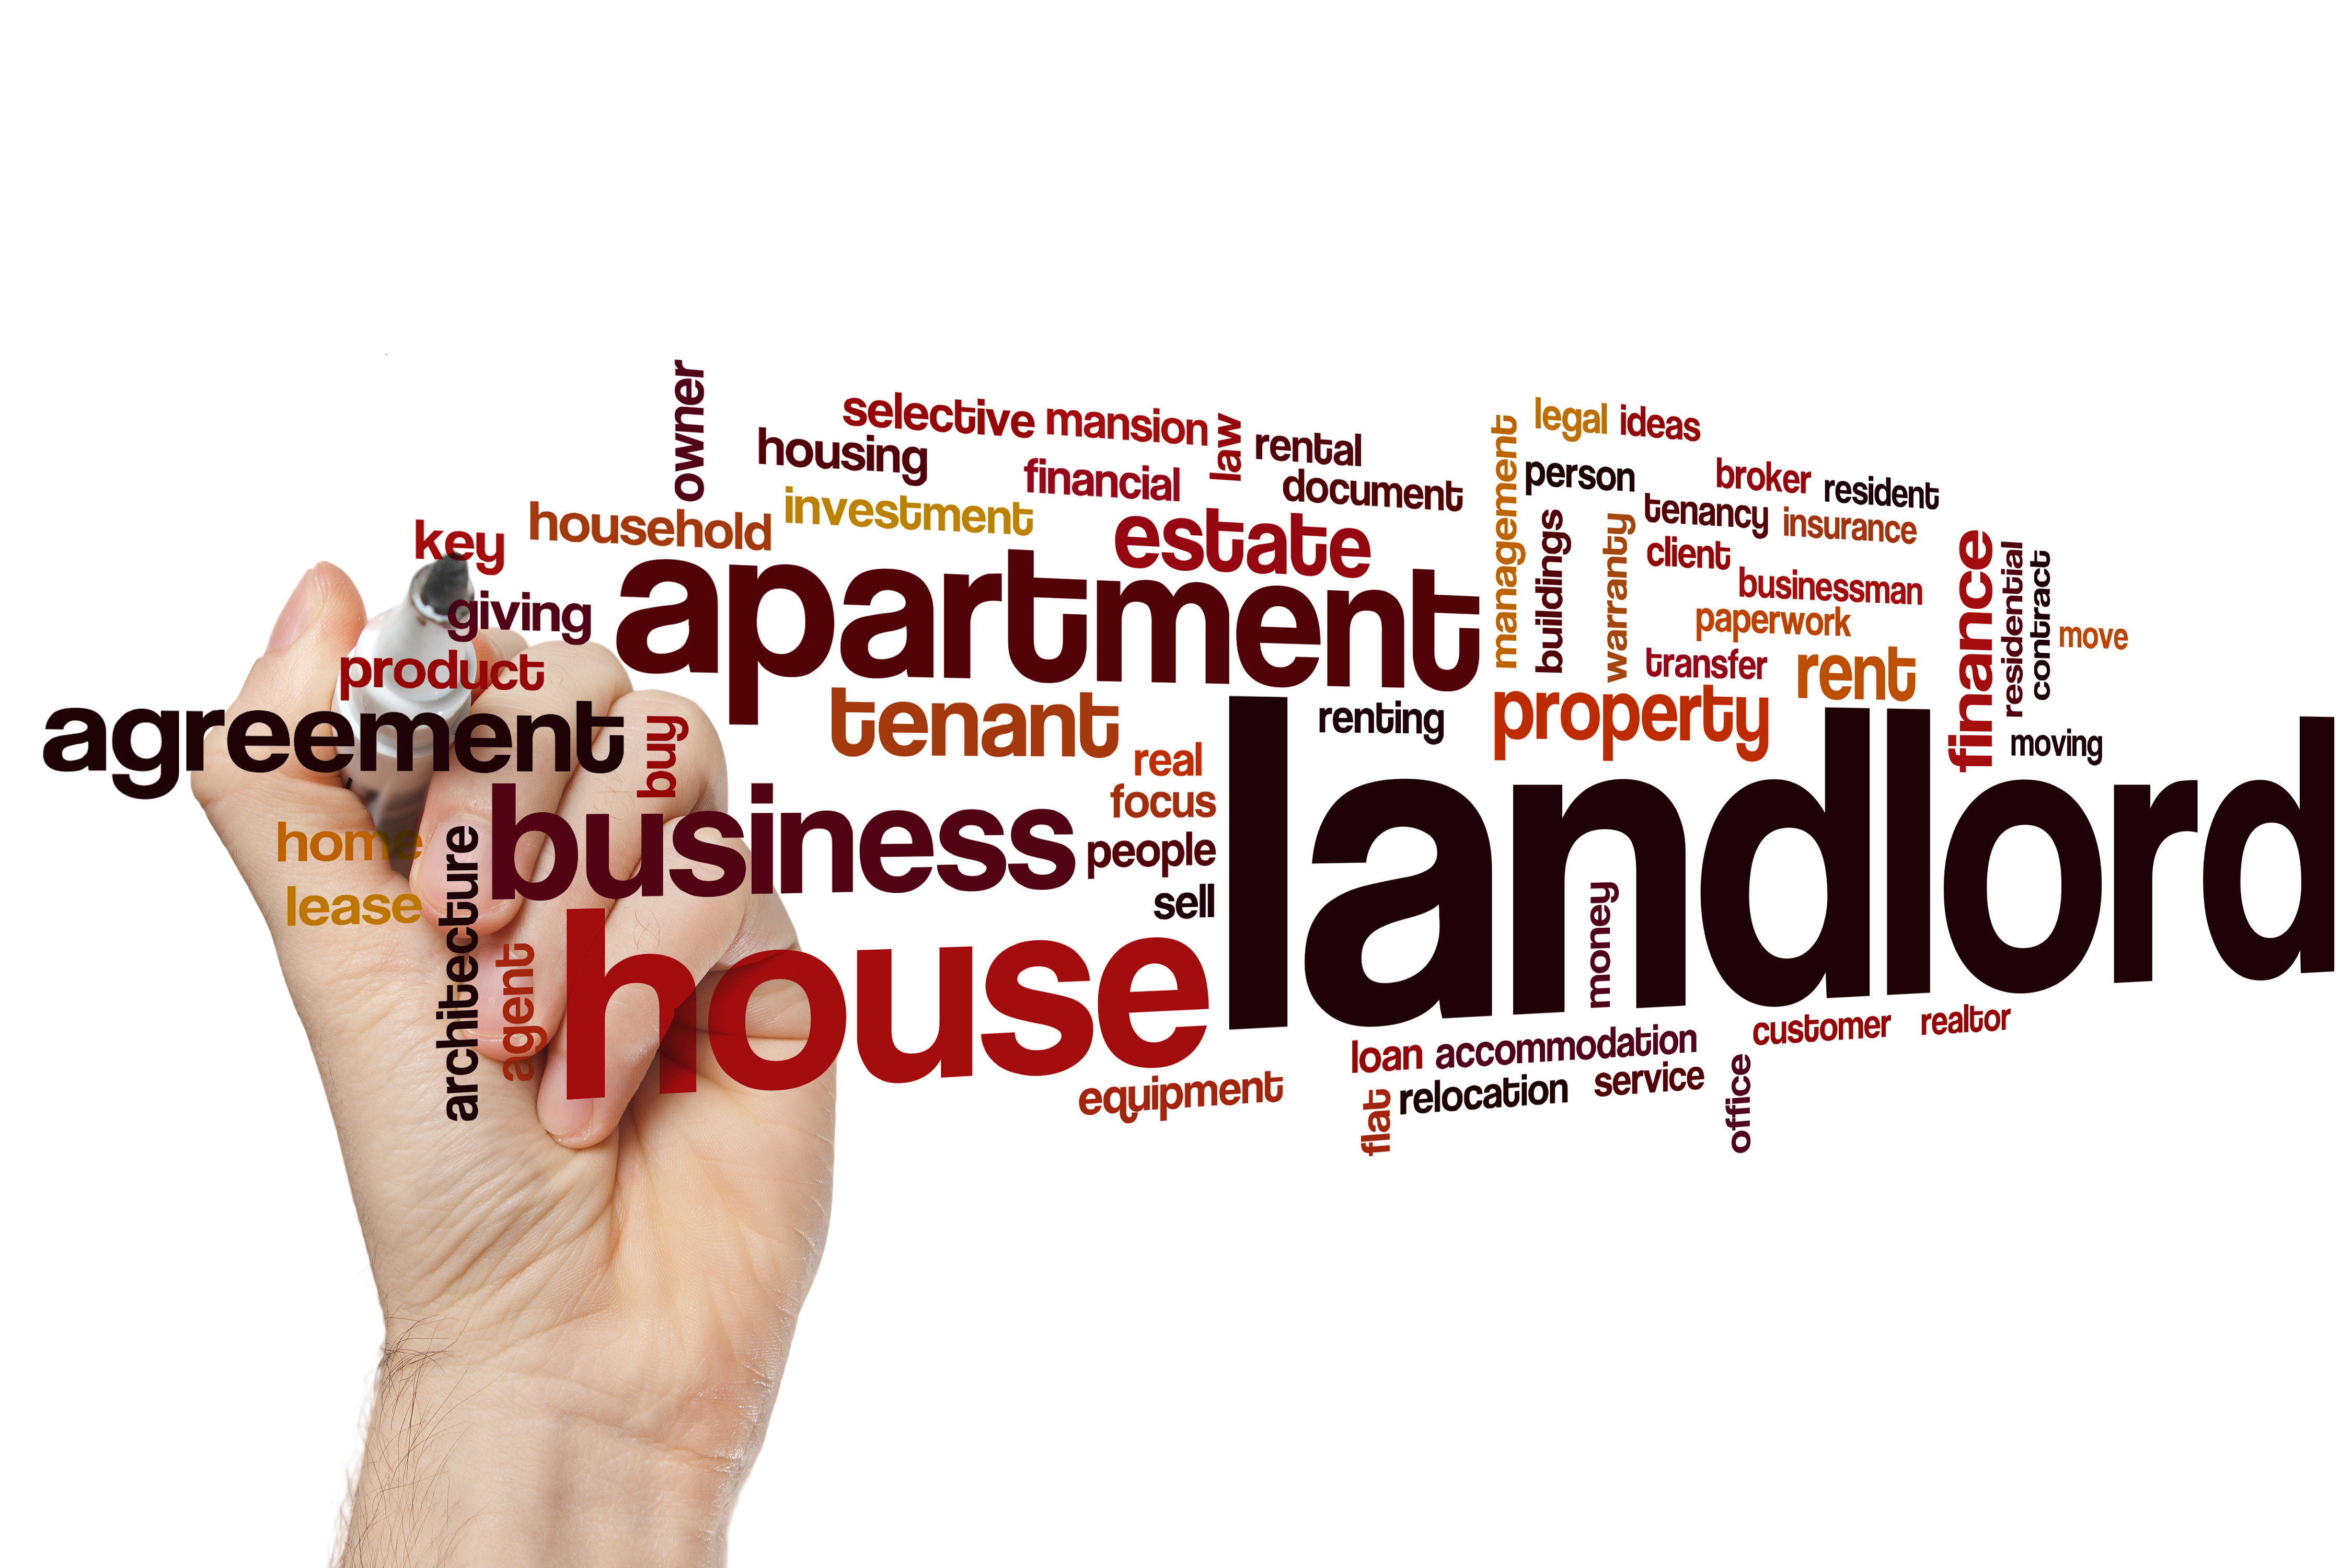 Does a Commercial Landlord have to be represented by an Attorney when Filing an Eviction in Broward County?